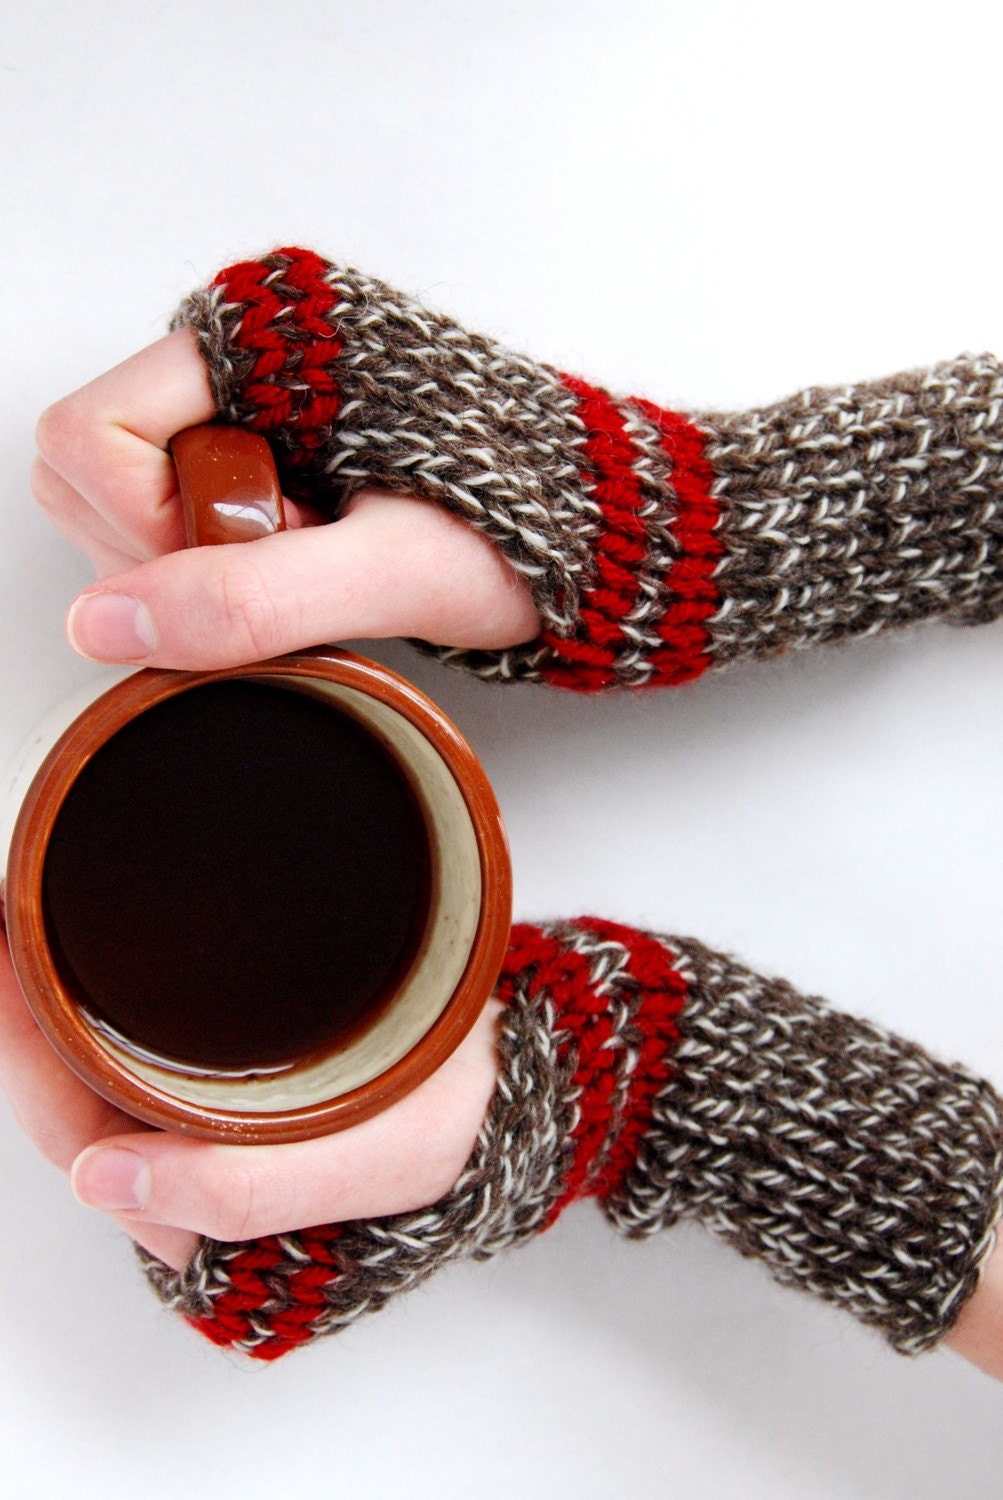 Stripe Wrist Warmers - Brown and Cranberry